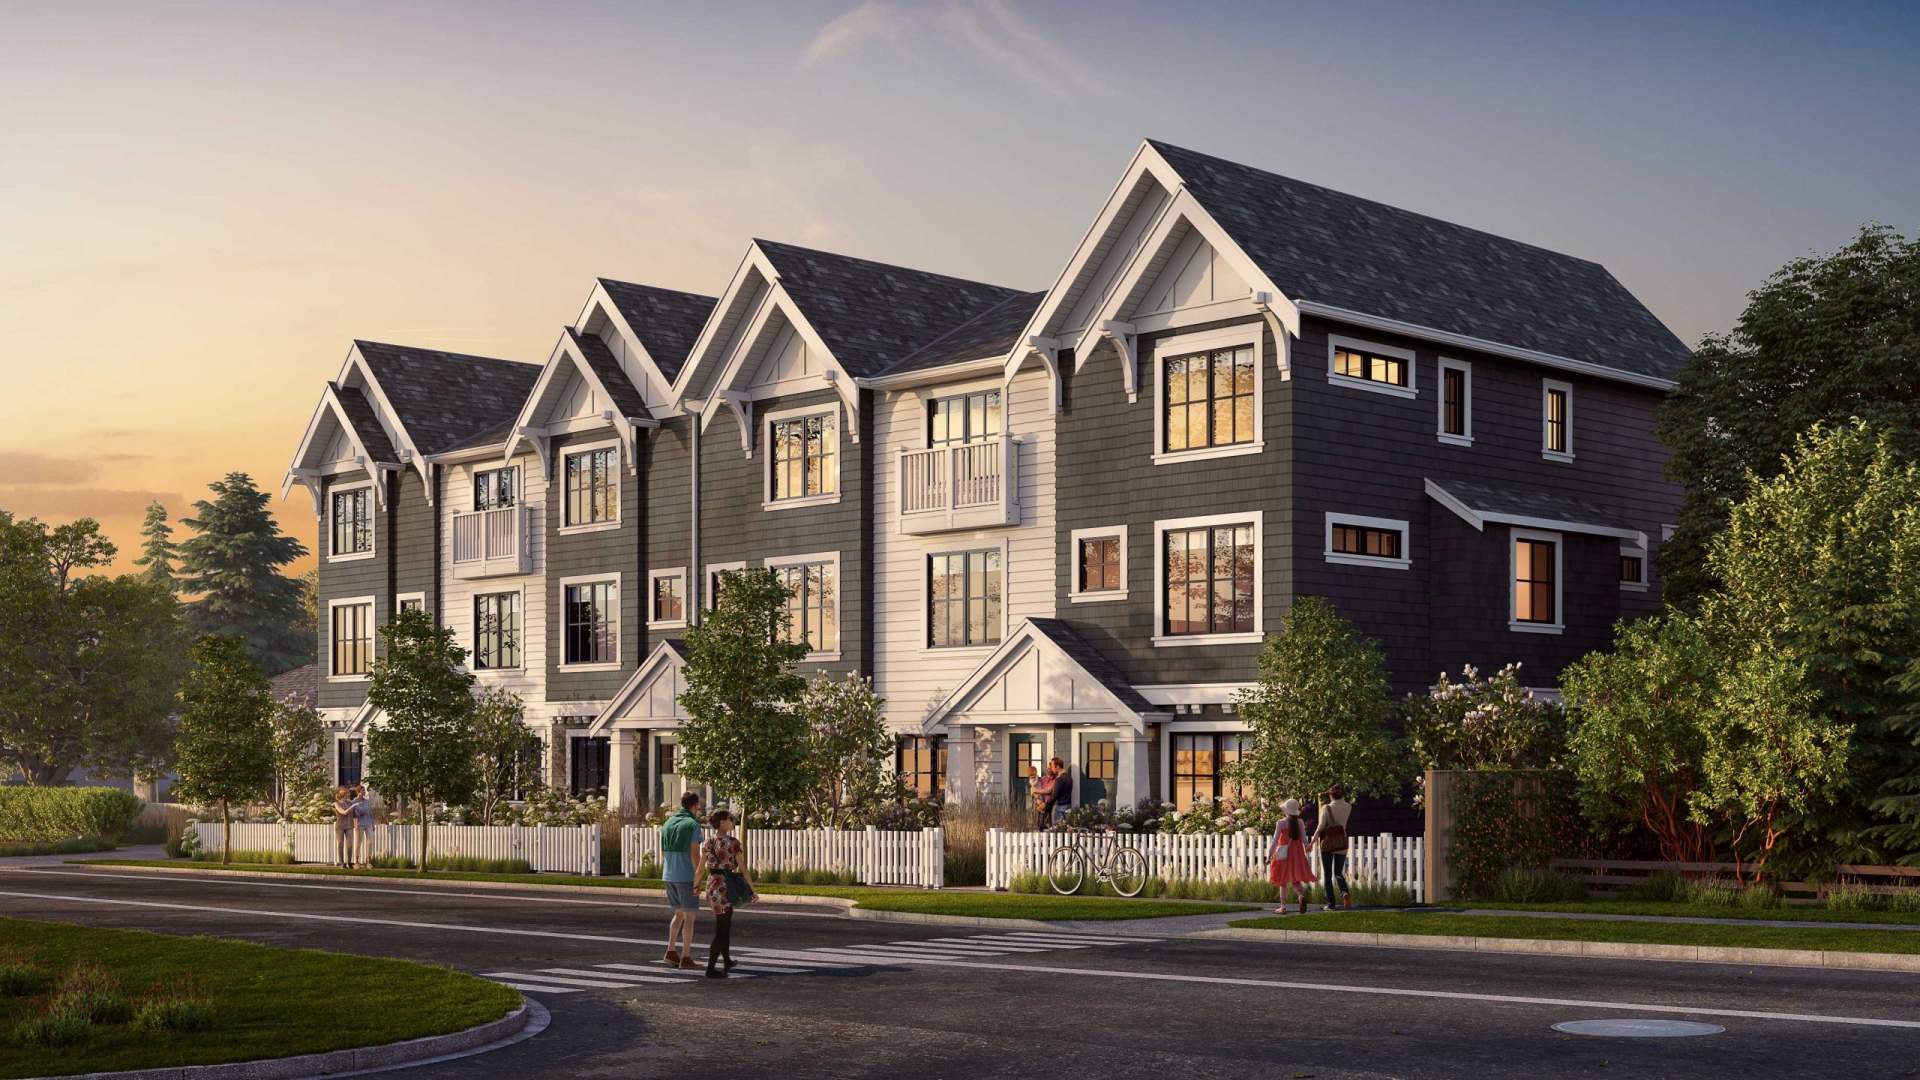 A collection of 3- & 4-bedroom traditional townhomes coming soon to Uptown.